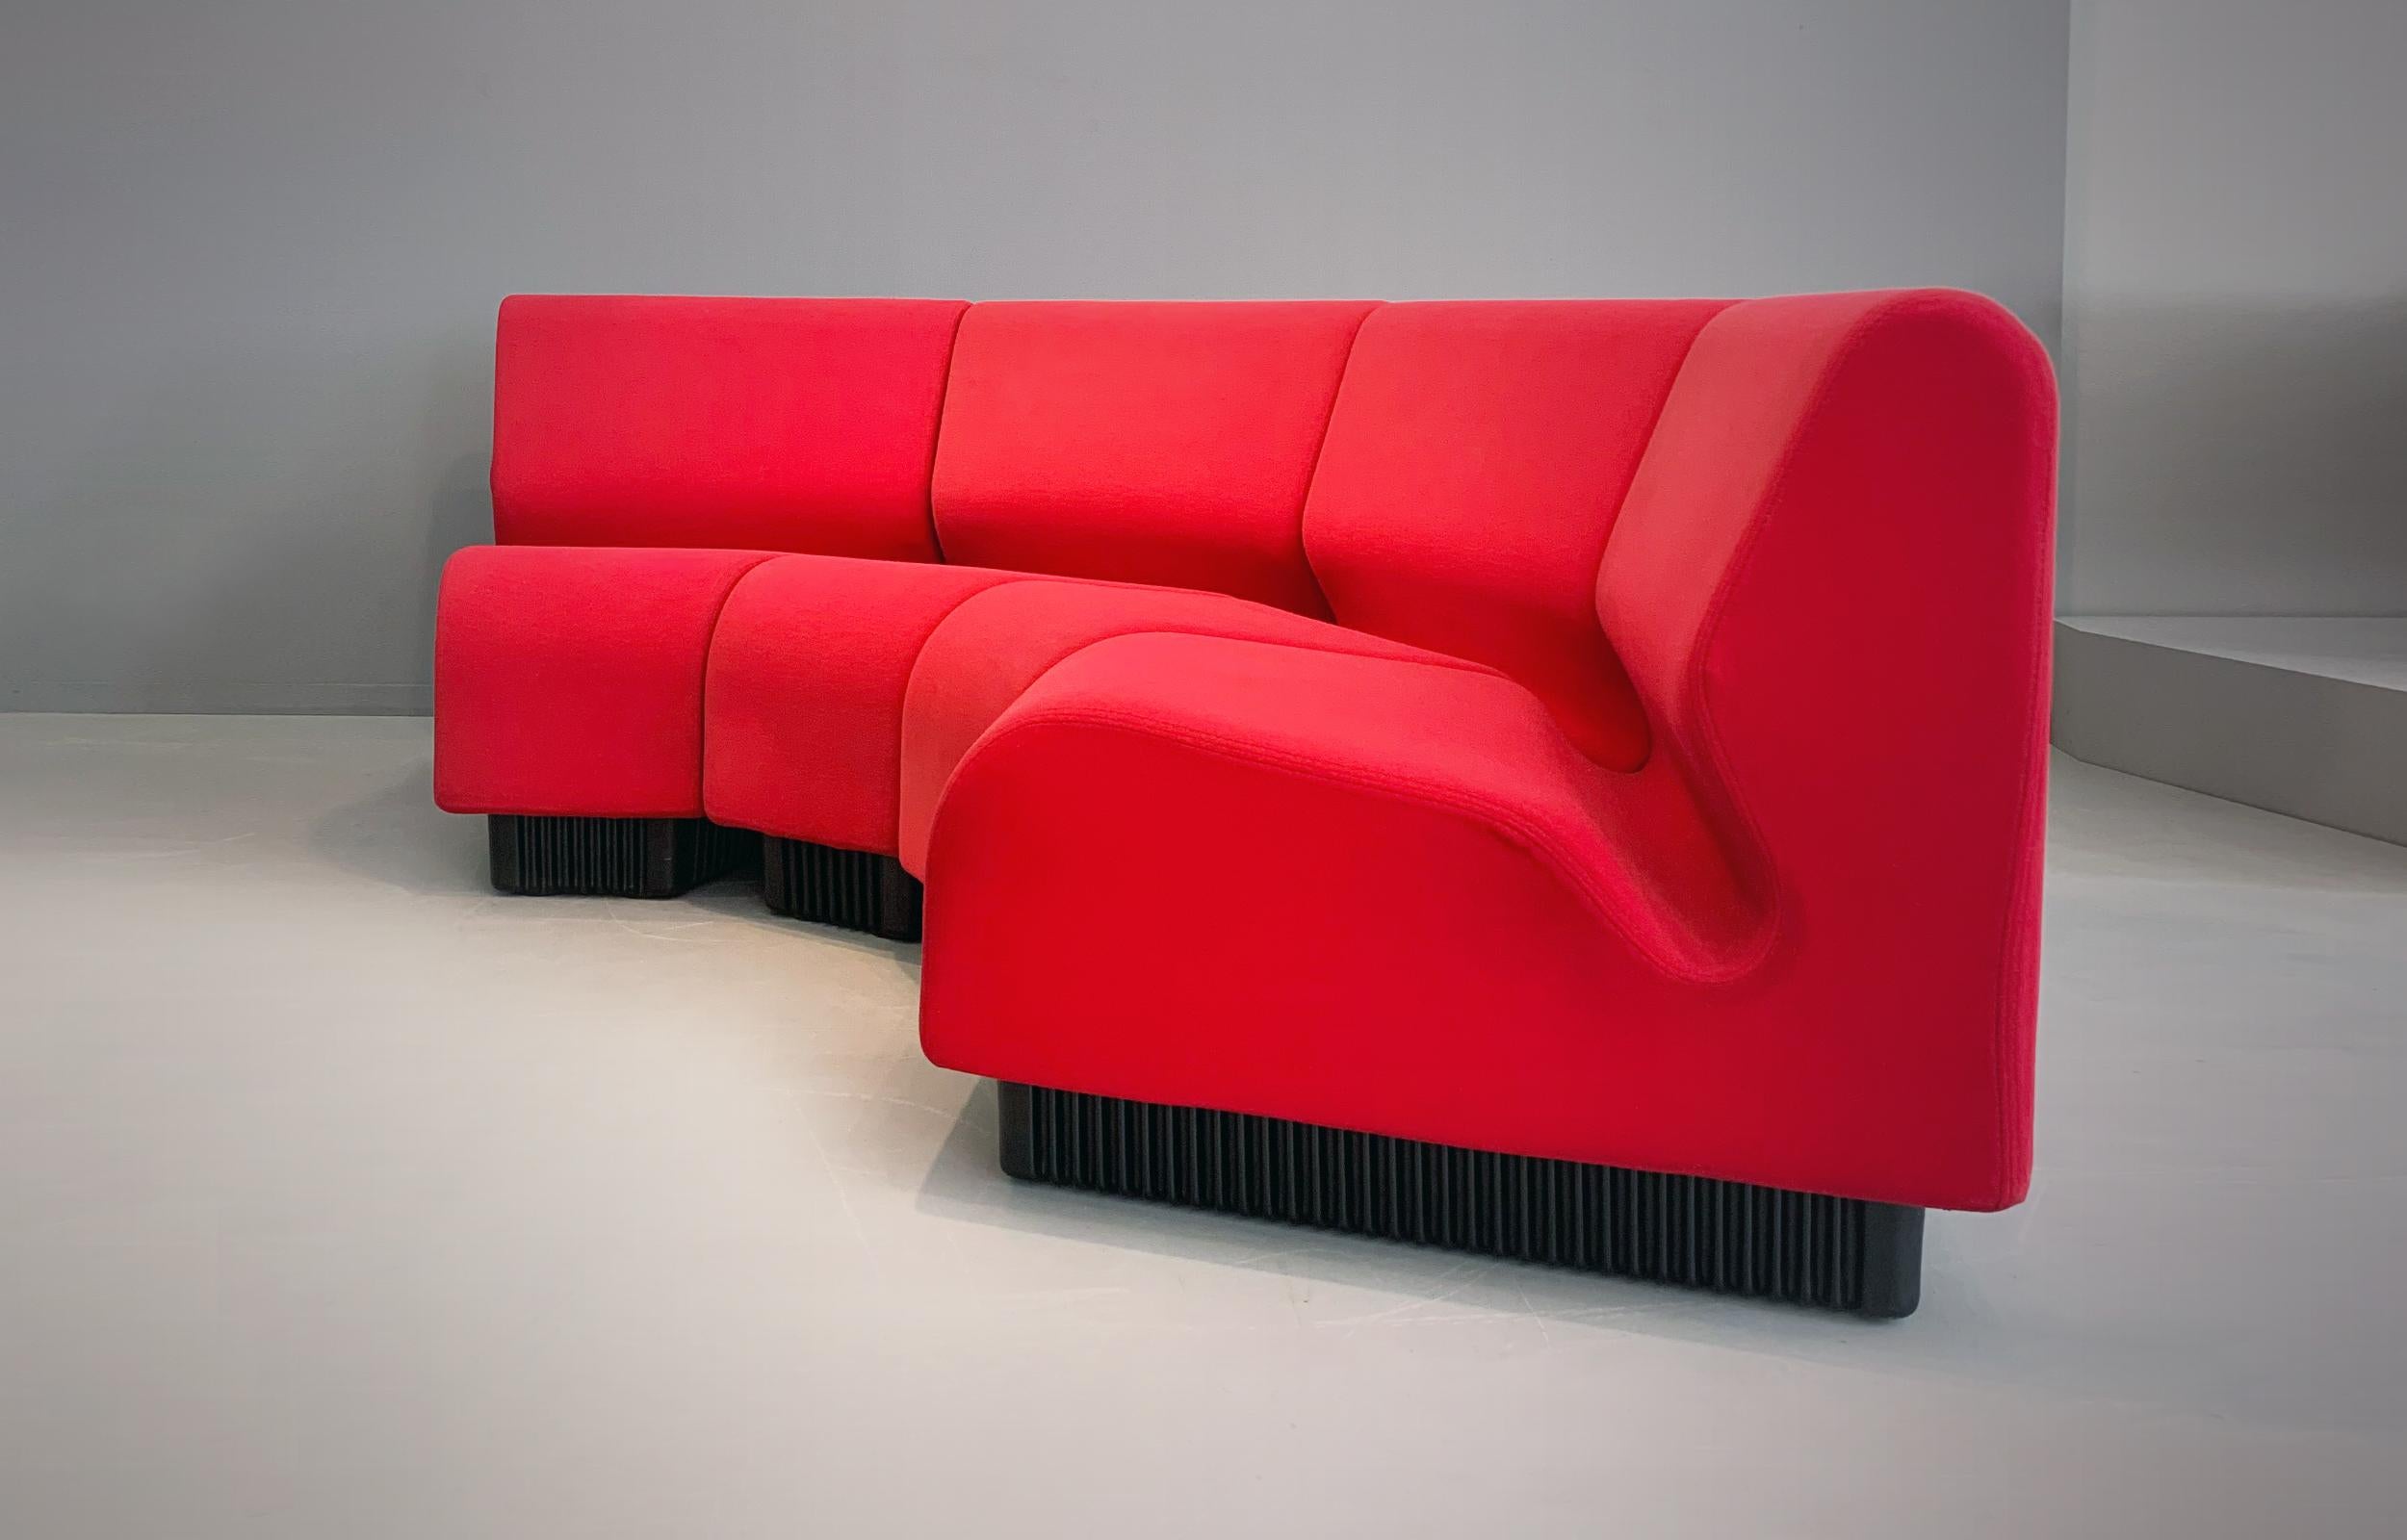 Beautiful modular sofa elements (4) designed by Don Chadwick in a bright red fabric. Produced by Herman Miller in the 1980s.
Wonderful condition.